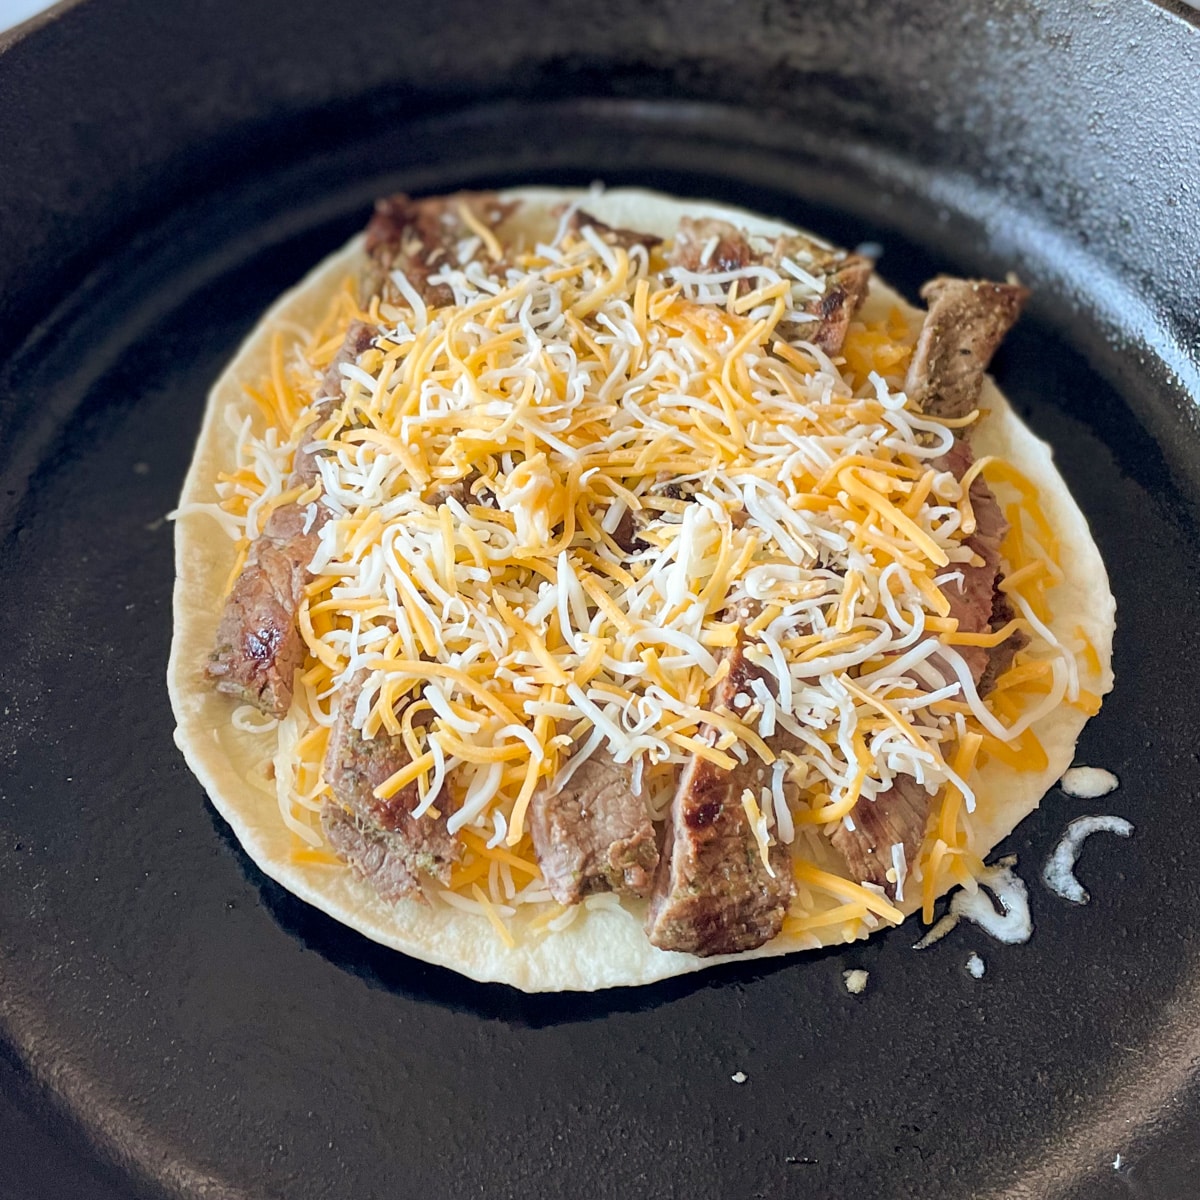 A tortilla, shredded cheese, and sliced carne asada are stacked in a cast iron pan.